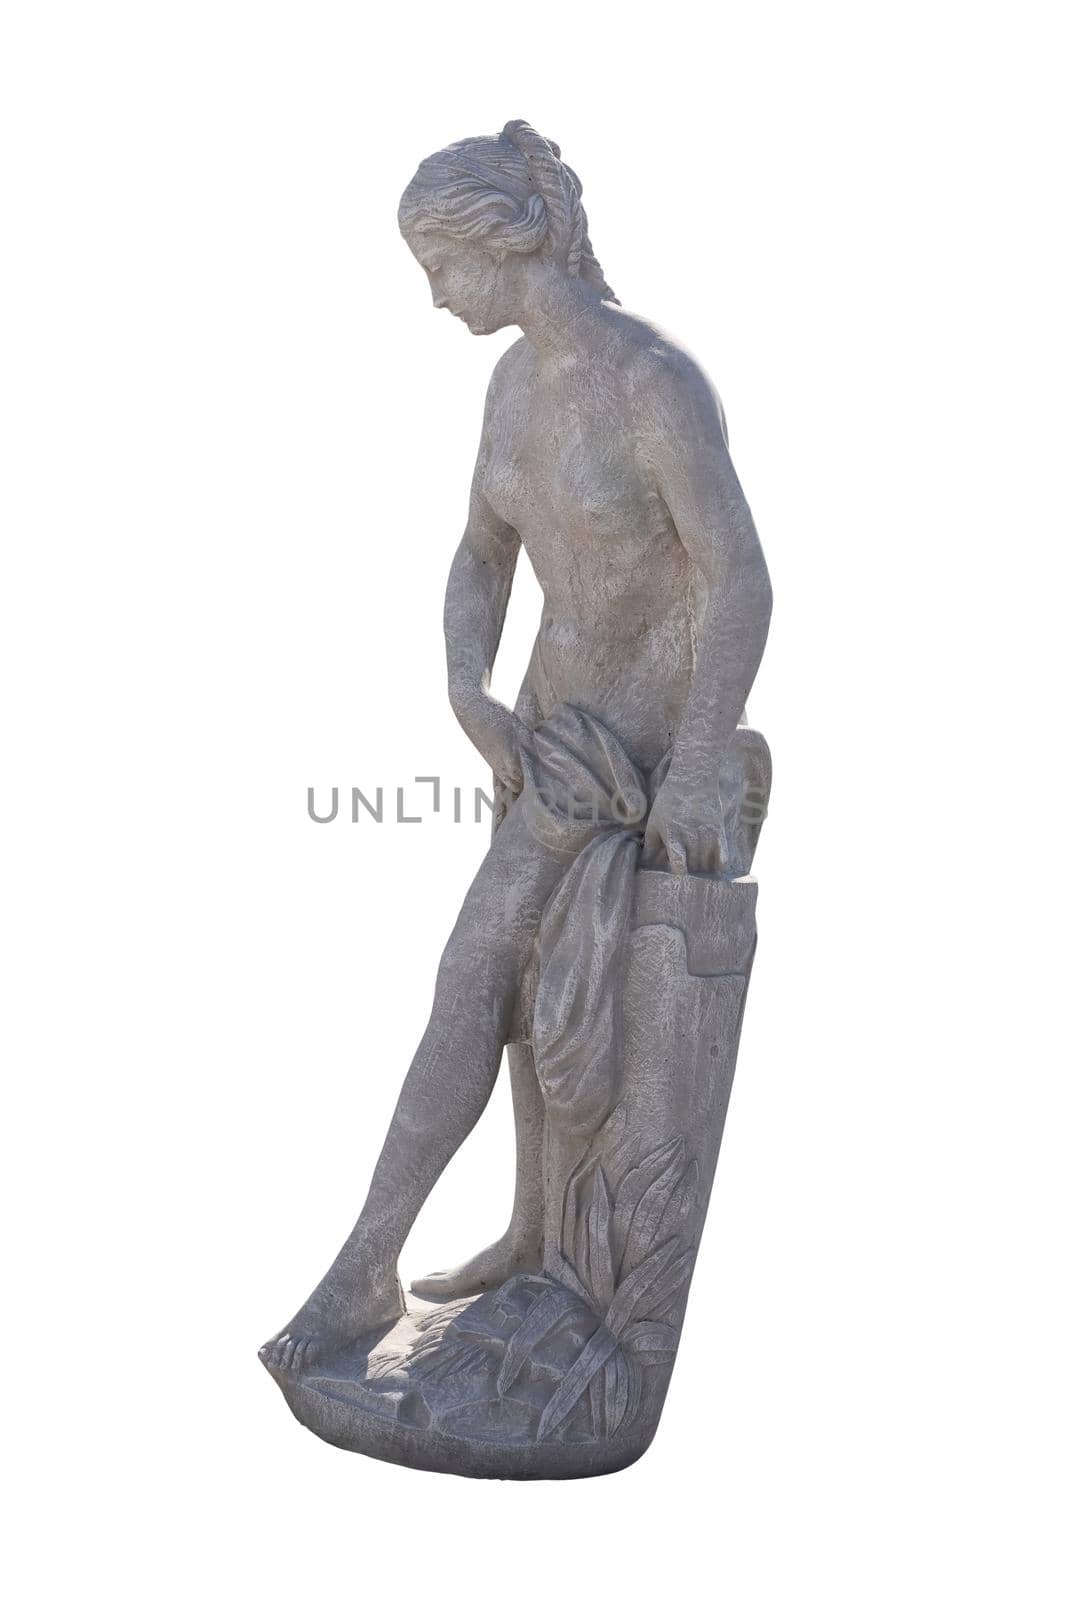 Side view of stone sculpture of naked woman on white background. art and classical style romantic figurative stone sculpture.